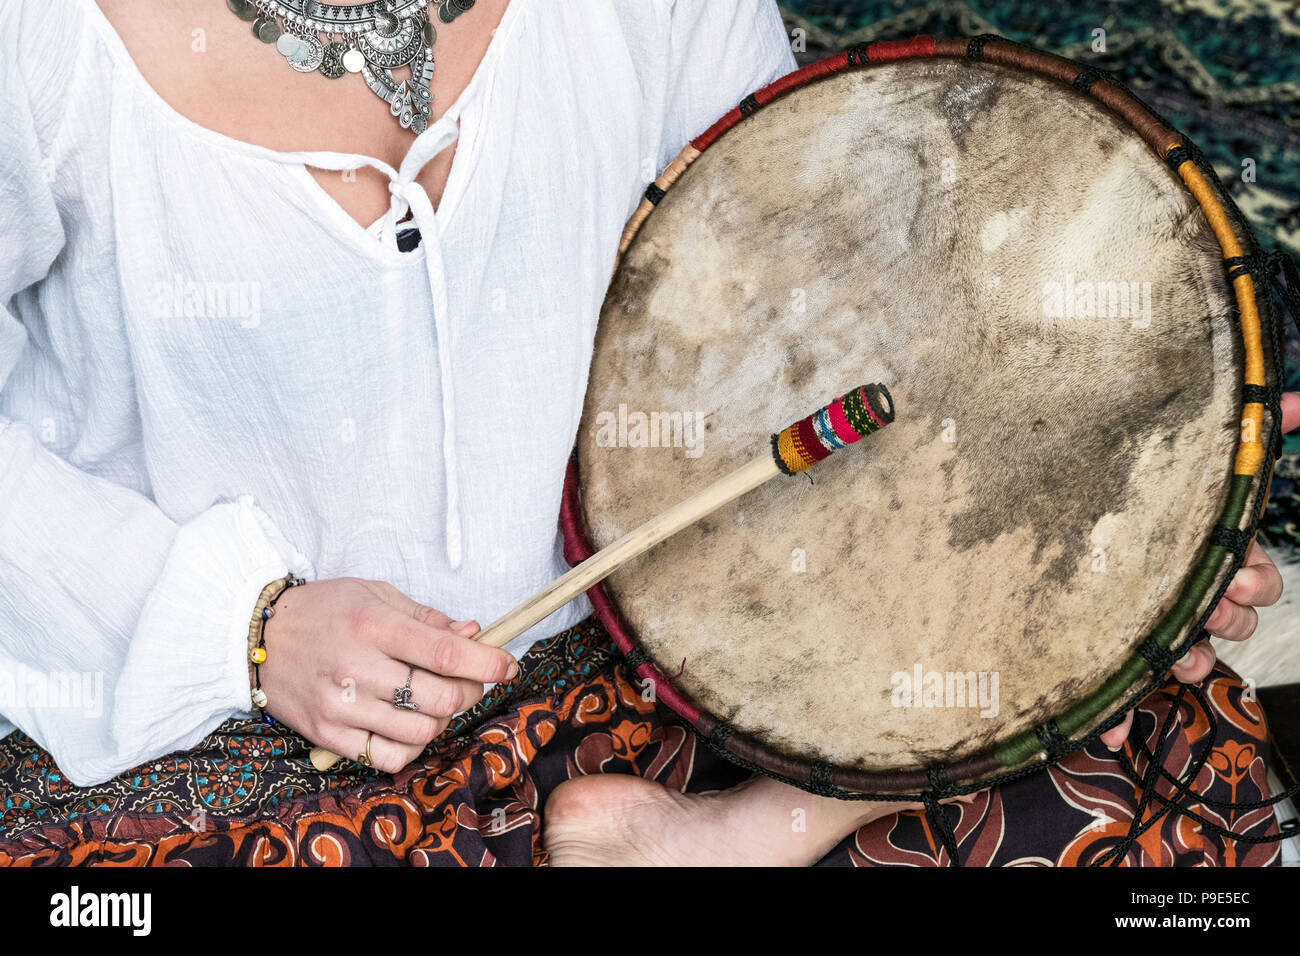 High angle view of woman wearing trousers with floral pattern sitting on shag carpet, holding shaman drum. Stock Photo